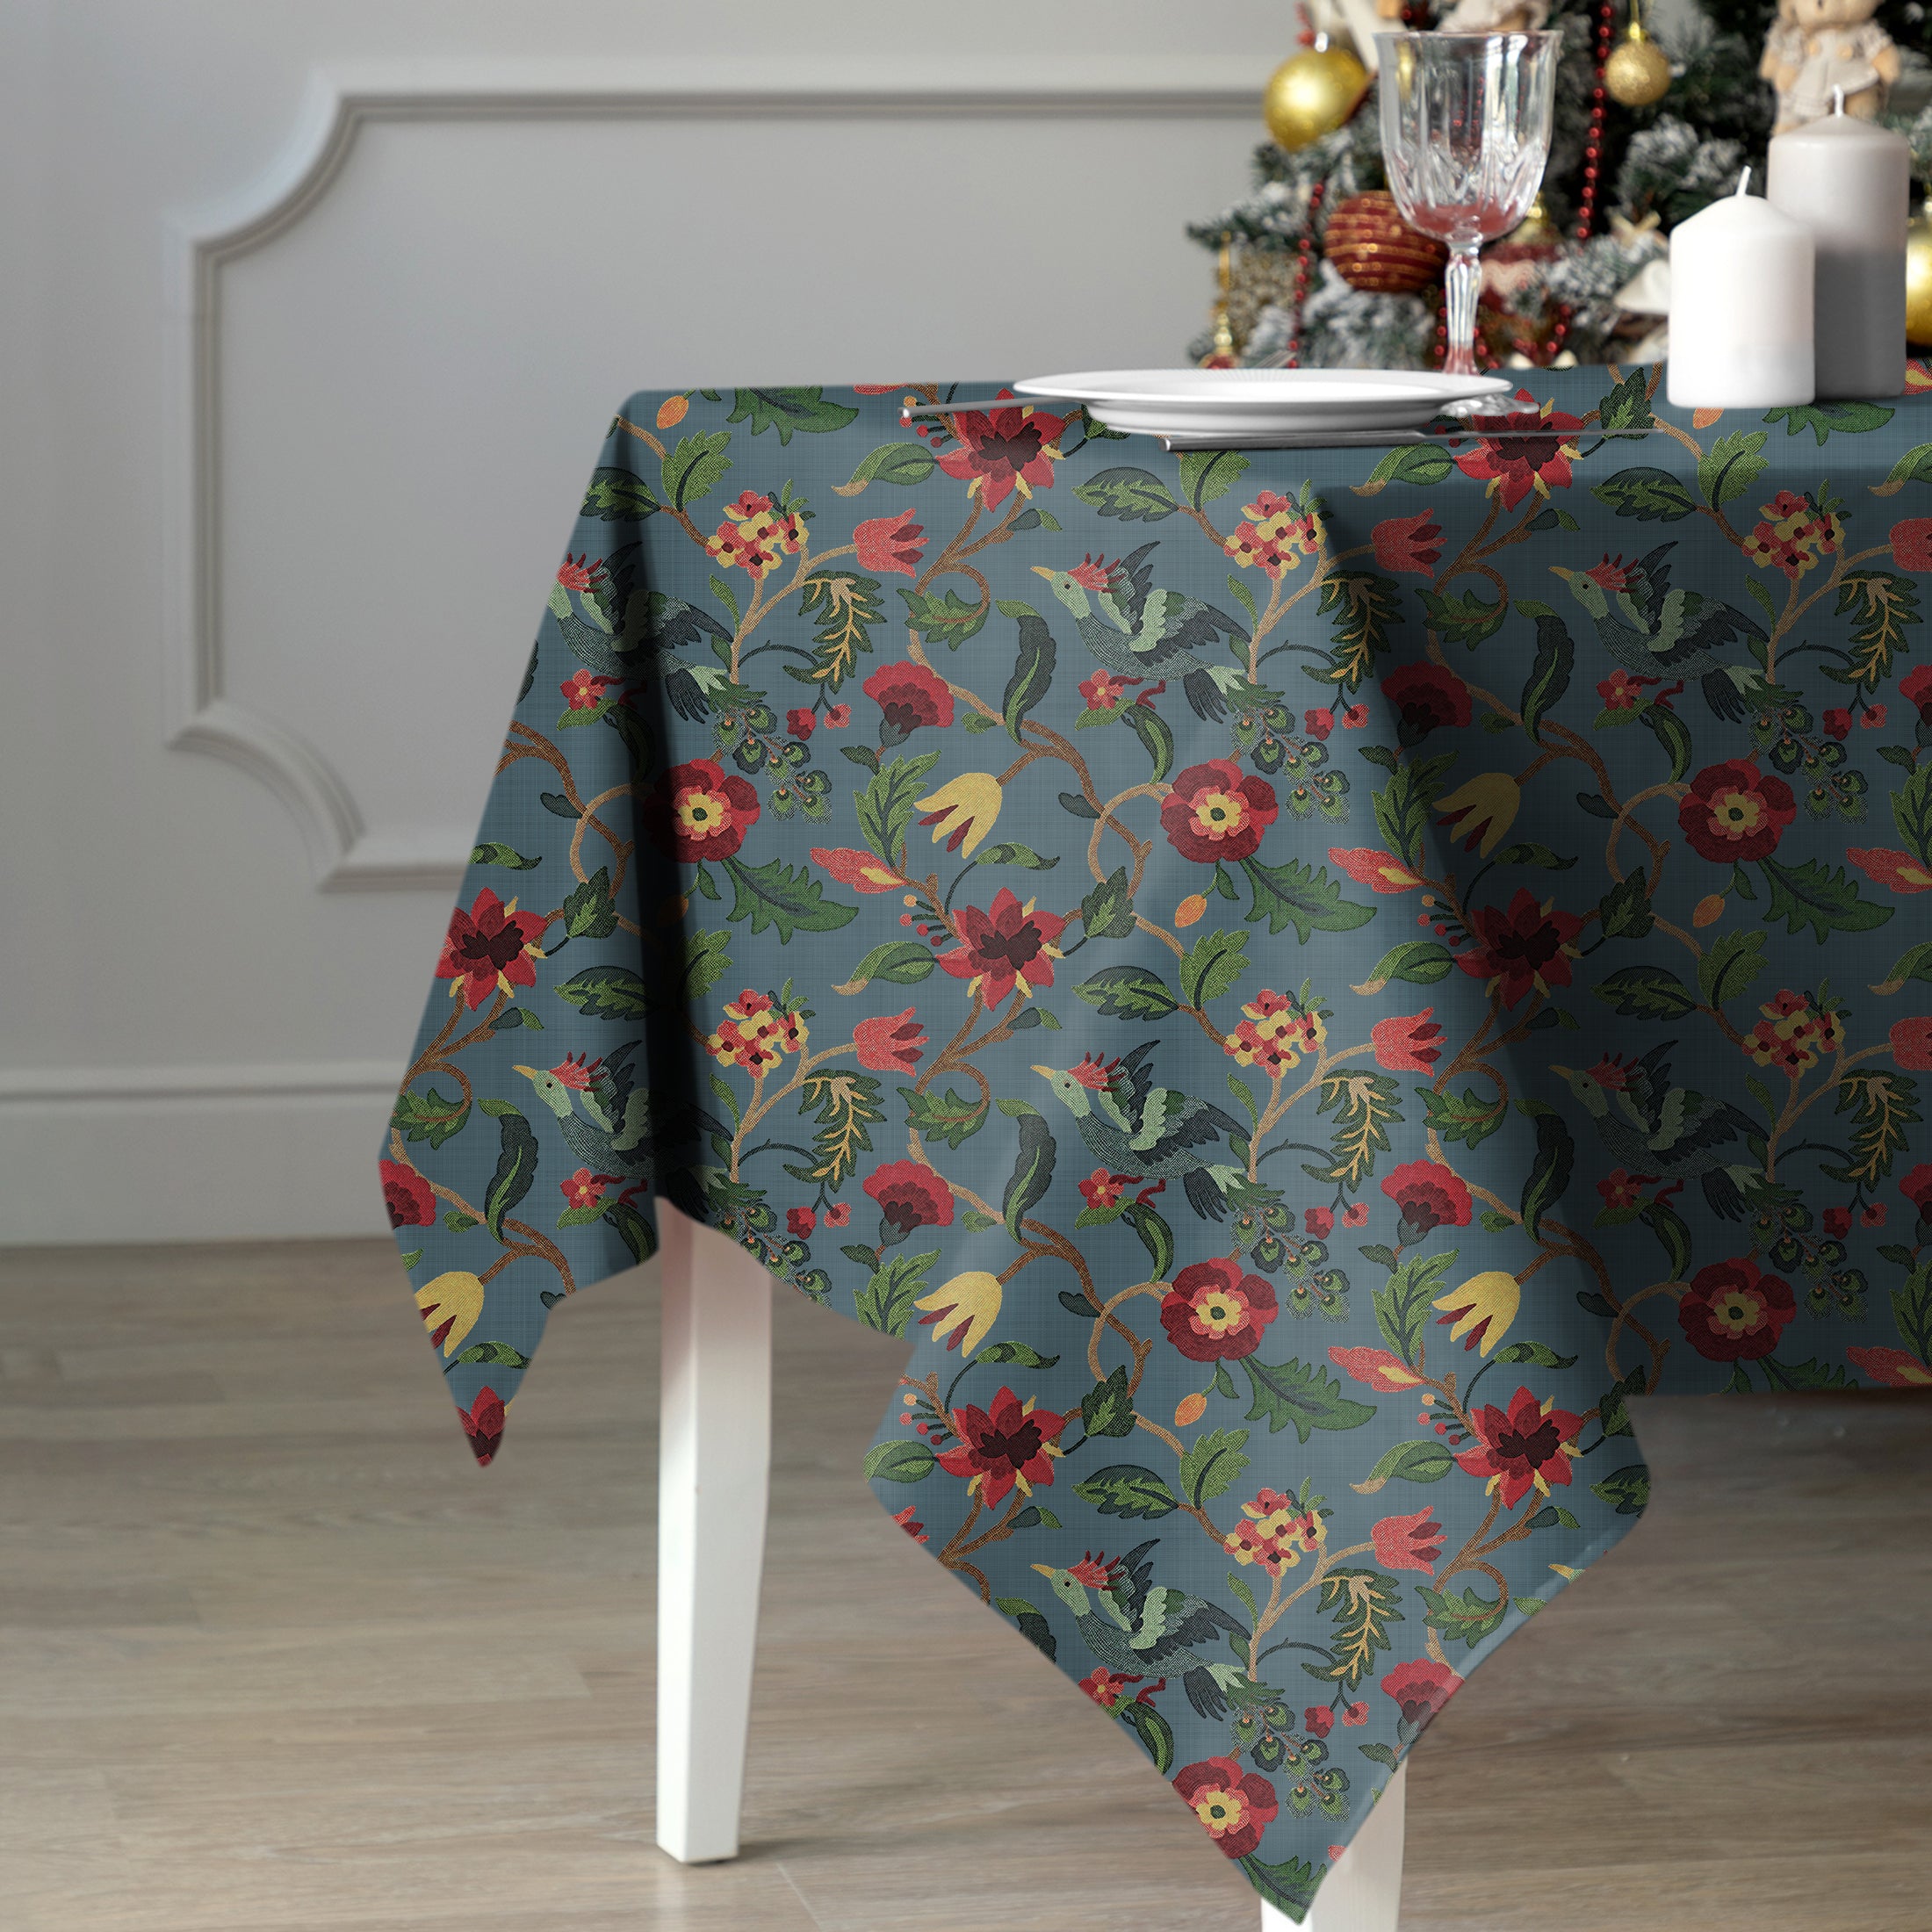 Cabal Teal 6 Seater Table Cloth